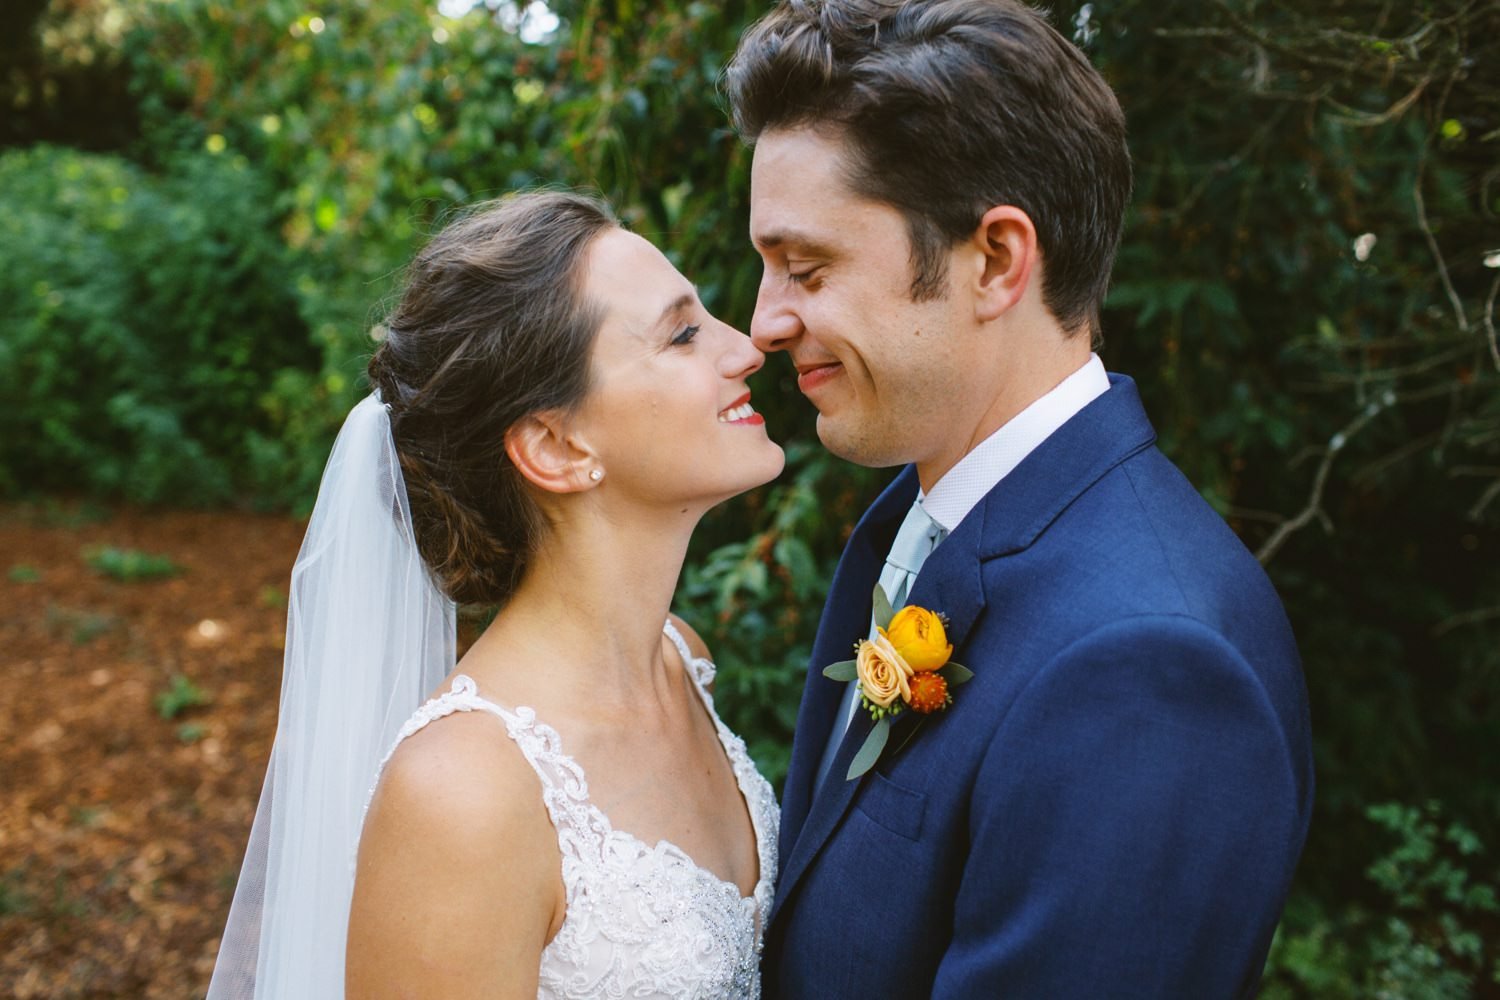  bride in white dress touches nose to nose of groom in navy blue suit 